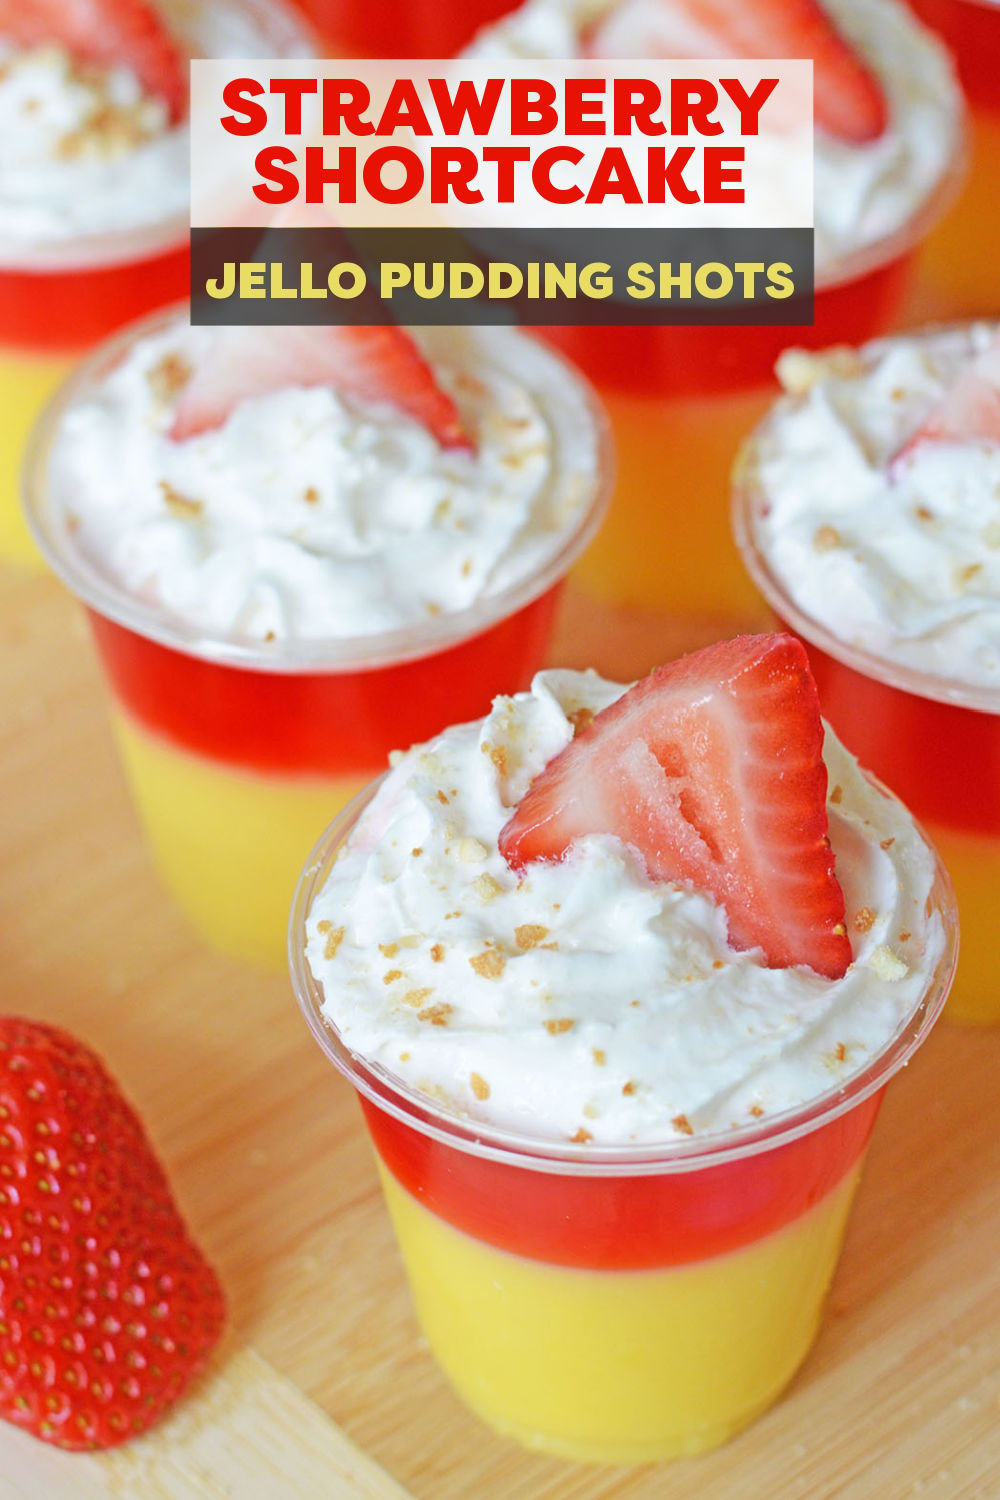 Layered strawberry shortcake jello shots are as pretty as they are delicious! These easy pudding shots are filled with vanilla pudding, strawberry jello, and are topped with whipped cream, a Nilla wafer, and fresh strawberries. | www.persnicketyplates.com